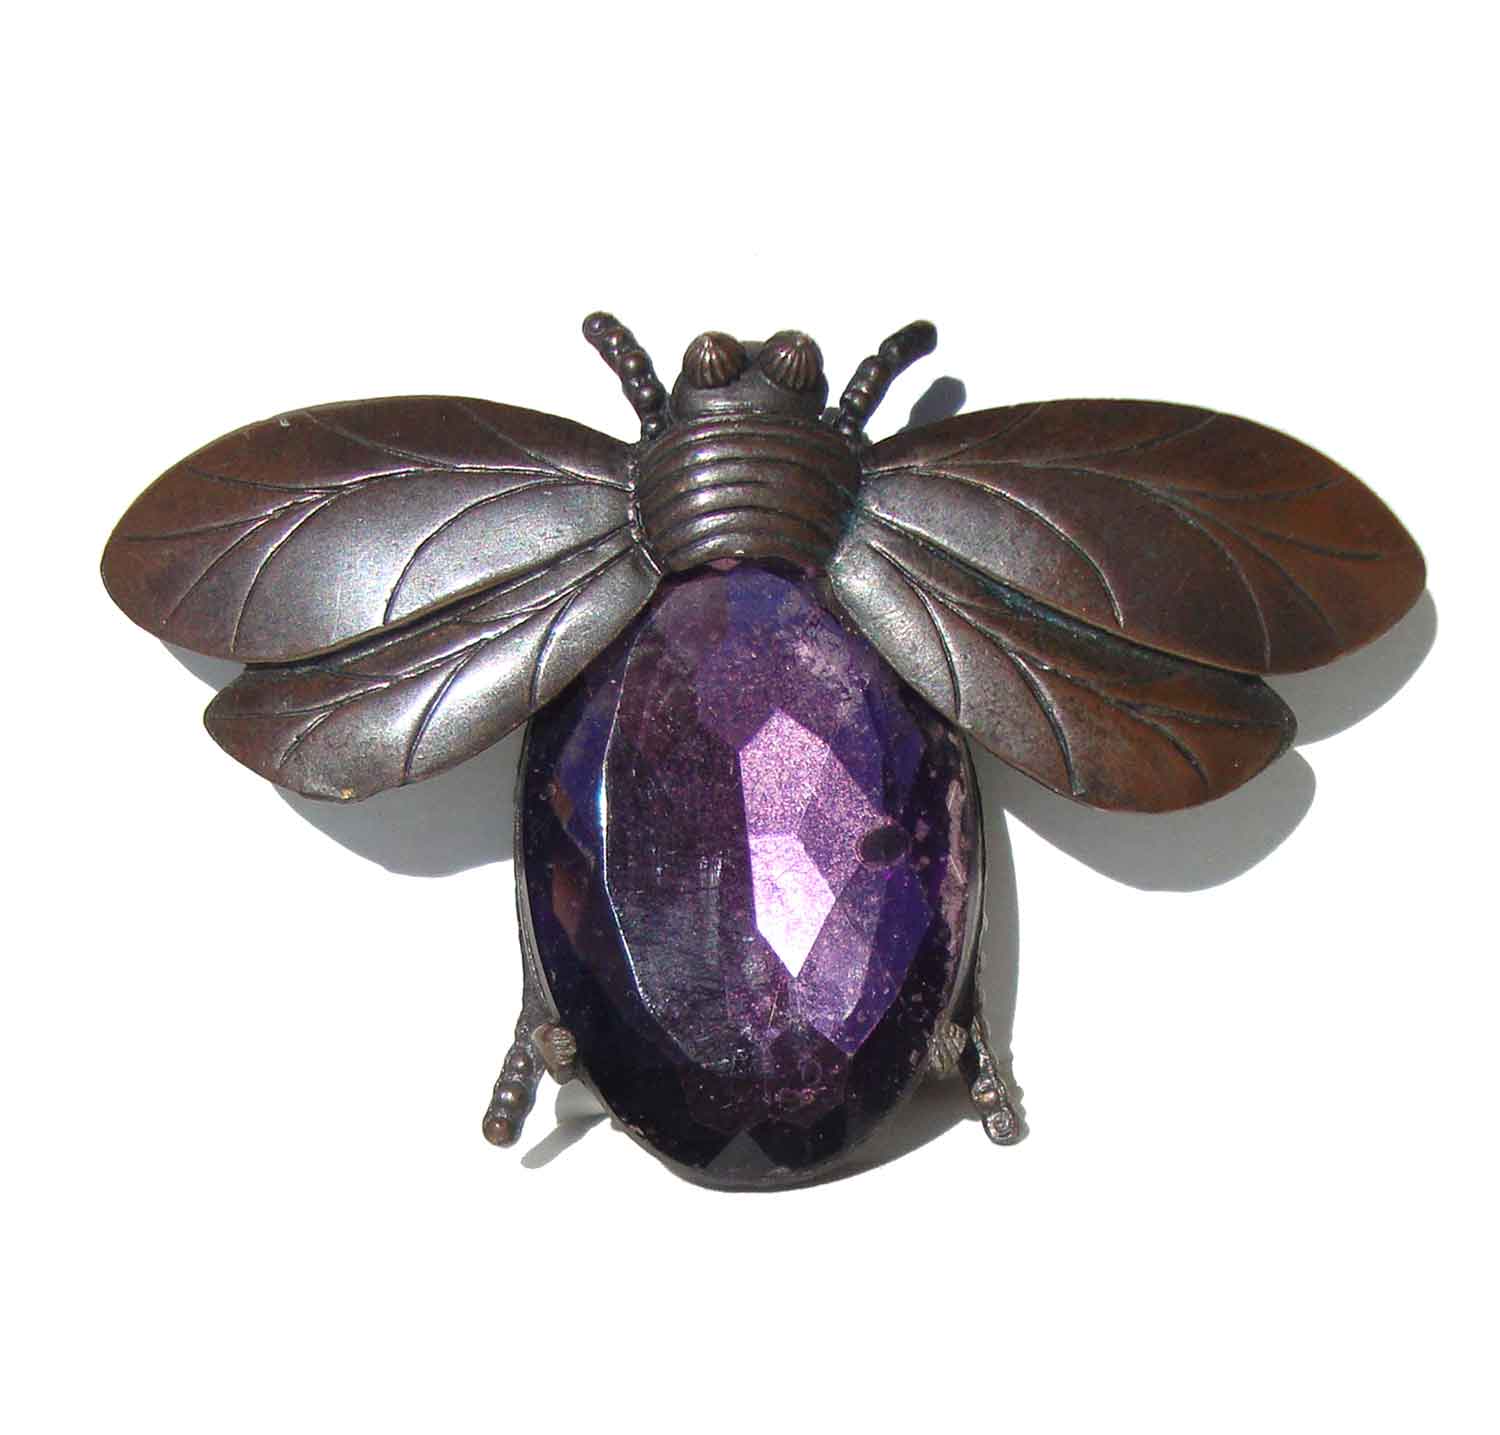 Vintage Big Bug Brooch Garrison Products Novelty Insect Pin – Book Piece